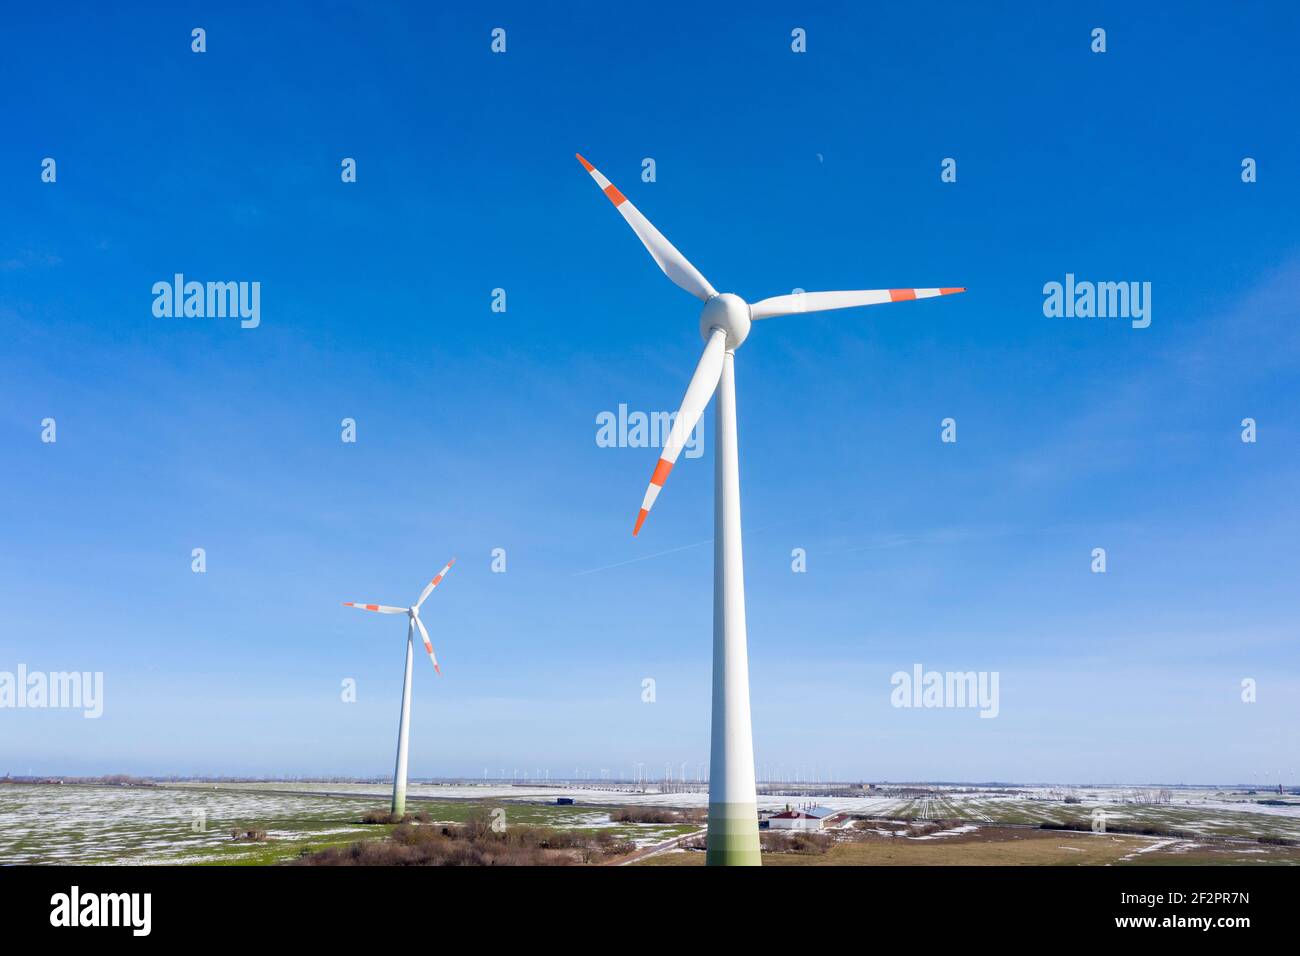 Germany, Saxony-Anhalt, Egeln, wind turbines in front of a blue sky Stock Photo